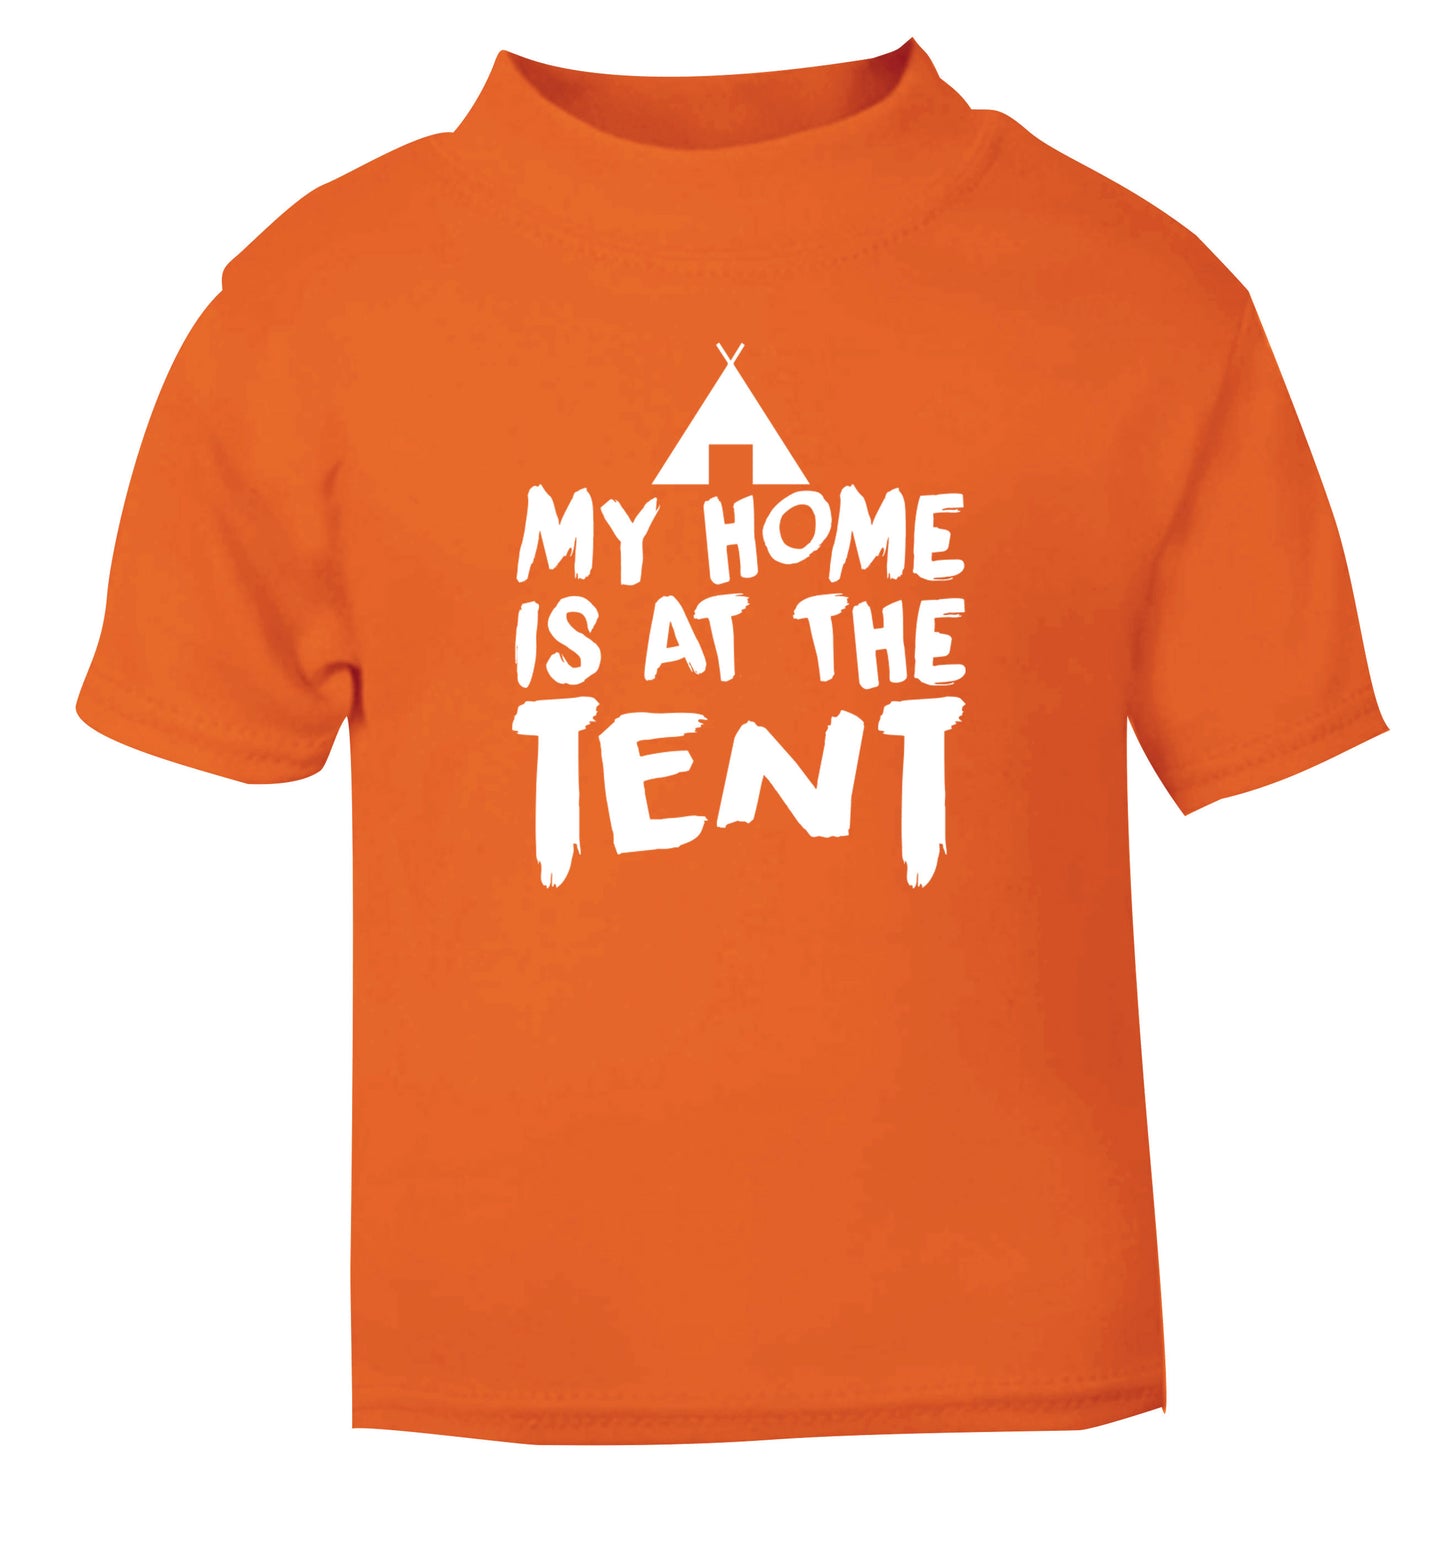 My home is at the tent orange Baby Toddler Tshirt 2 Years